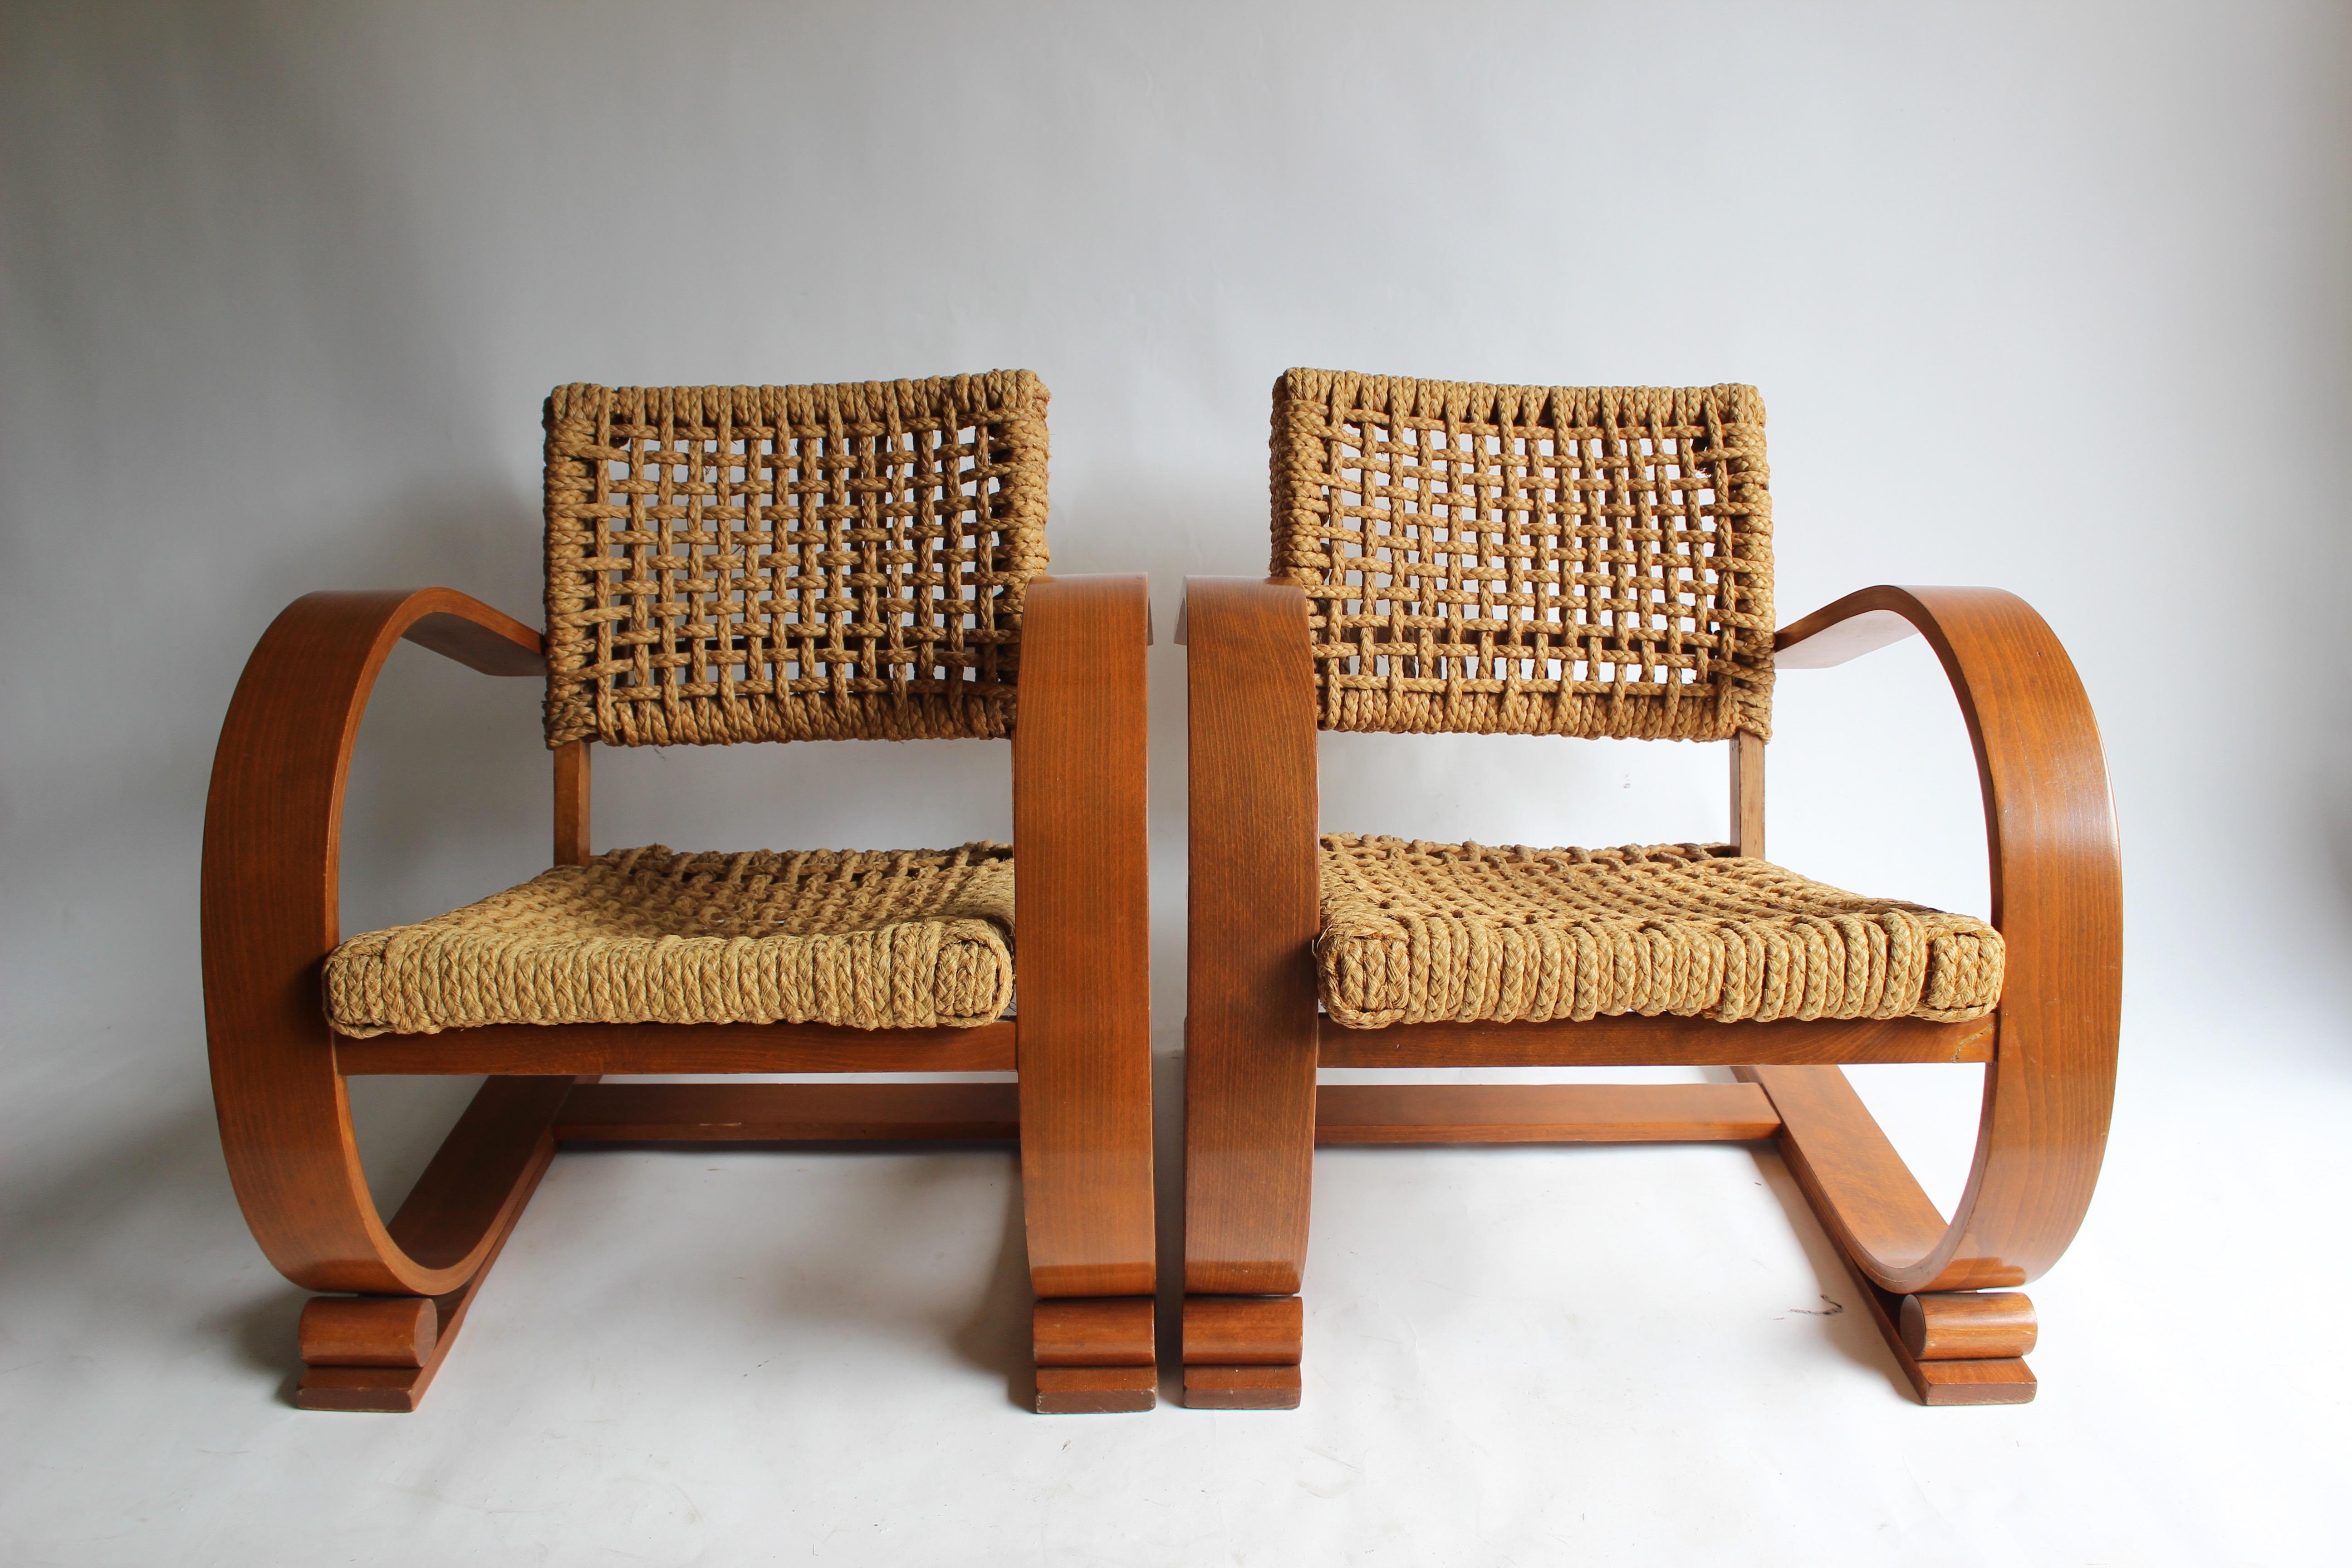 Pair of rope and maple French arm chairs by Frida Minet and Adrien Audoux.